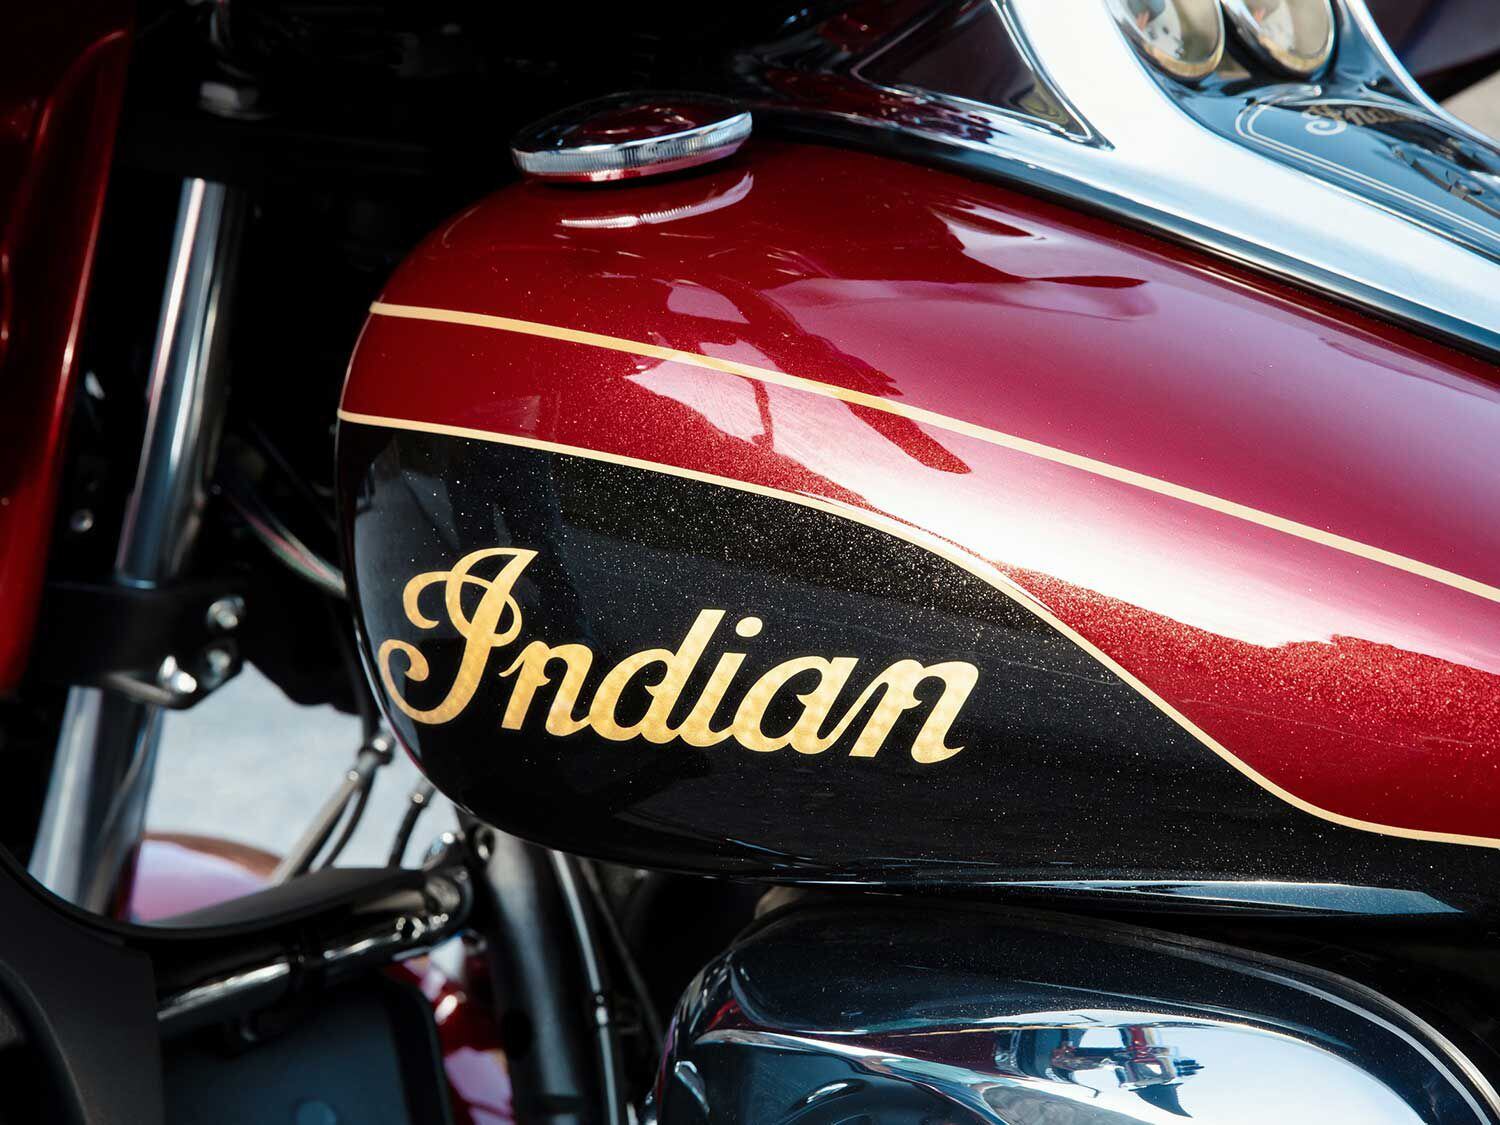 Deep, lustrous paint and 24-karat gold leaf badging, hand-finished. Any questions?